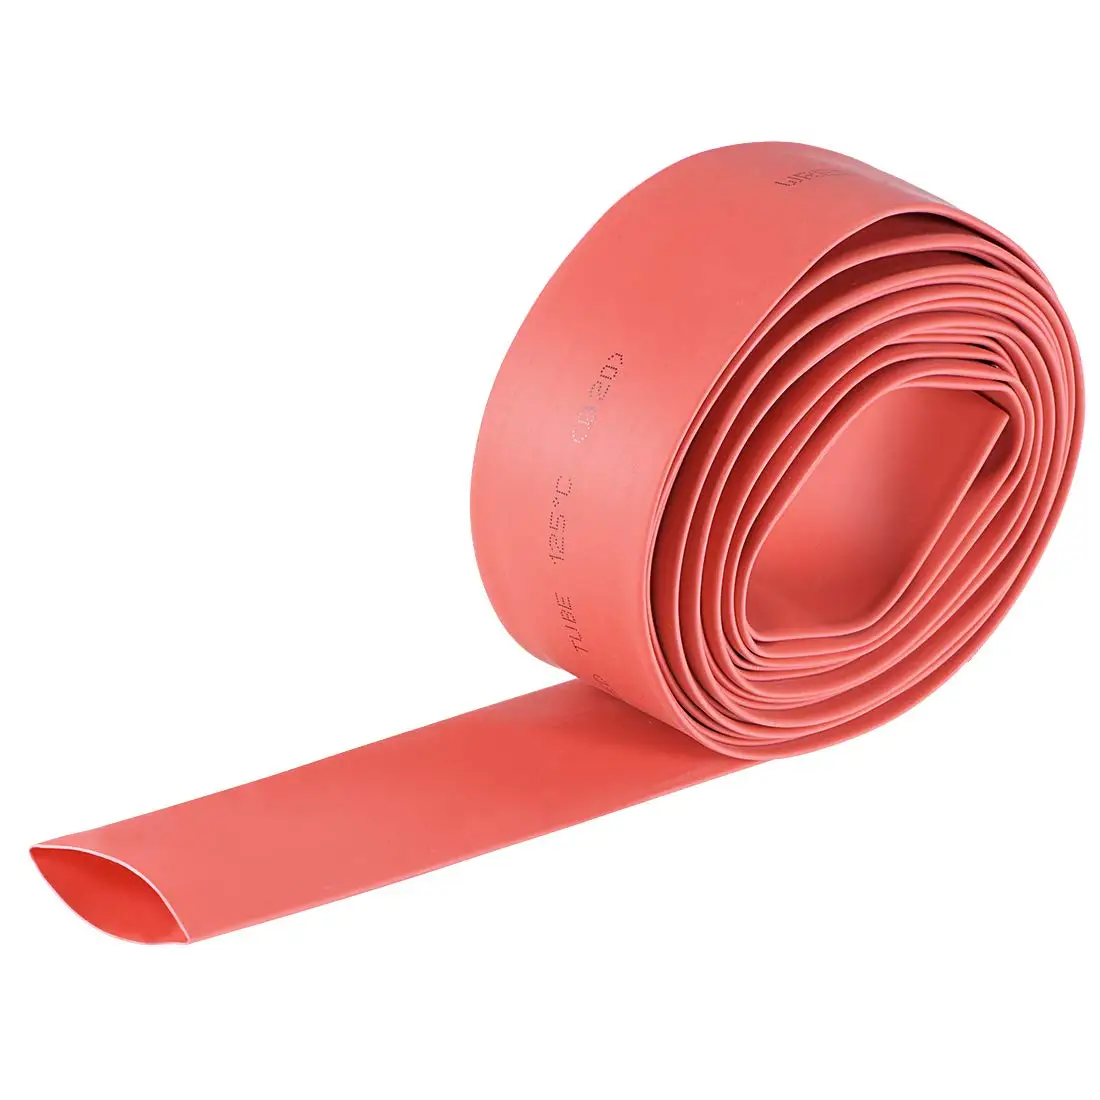 

Keszoox Heat Shrink Tubing, 3/4"(20mm) Dia 34mm Flat Width 2:1 Ratio Shrinkable Tube Cable Sleeve 10ft - Red